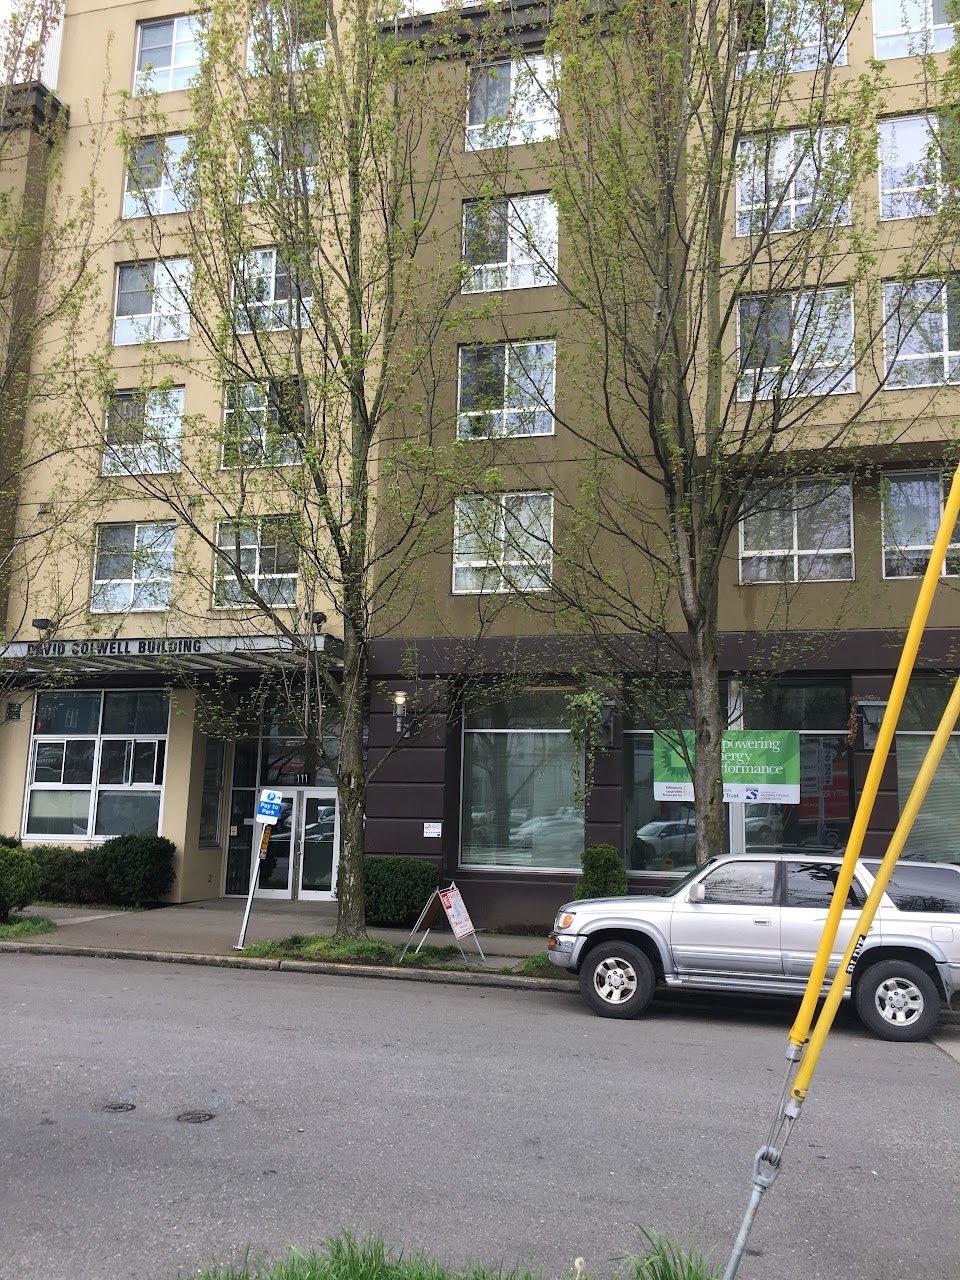 Photo of DAVID COLWELL BUILDING. Affordable housing located at 111 YALE AVENUE NORTH SEATTLE, WA 98109